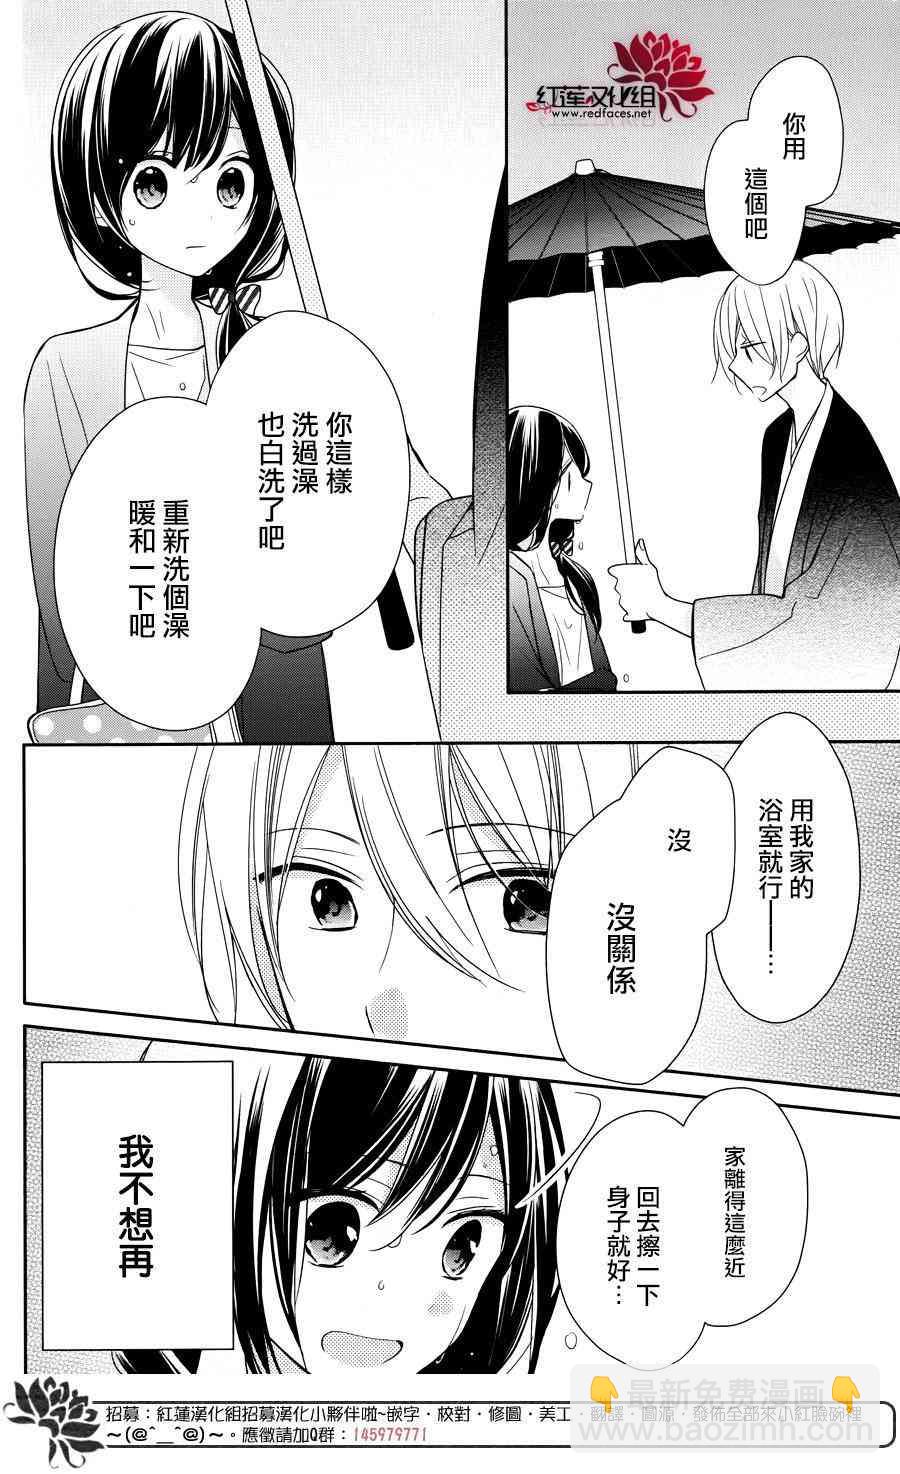 If given a second chance - 4話 - 8